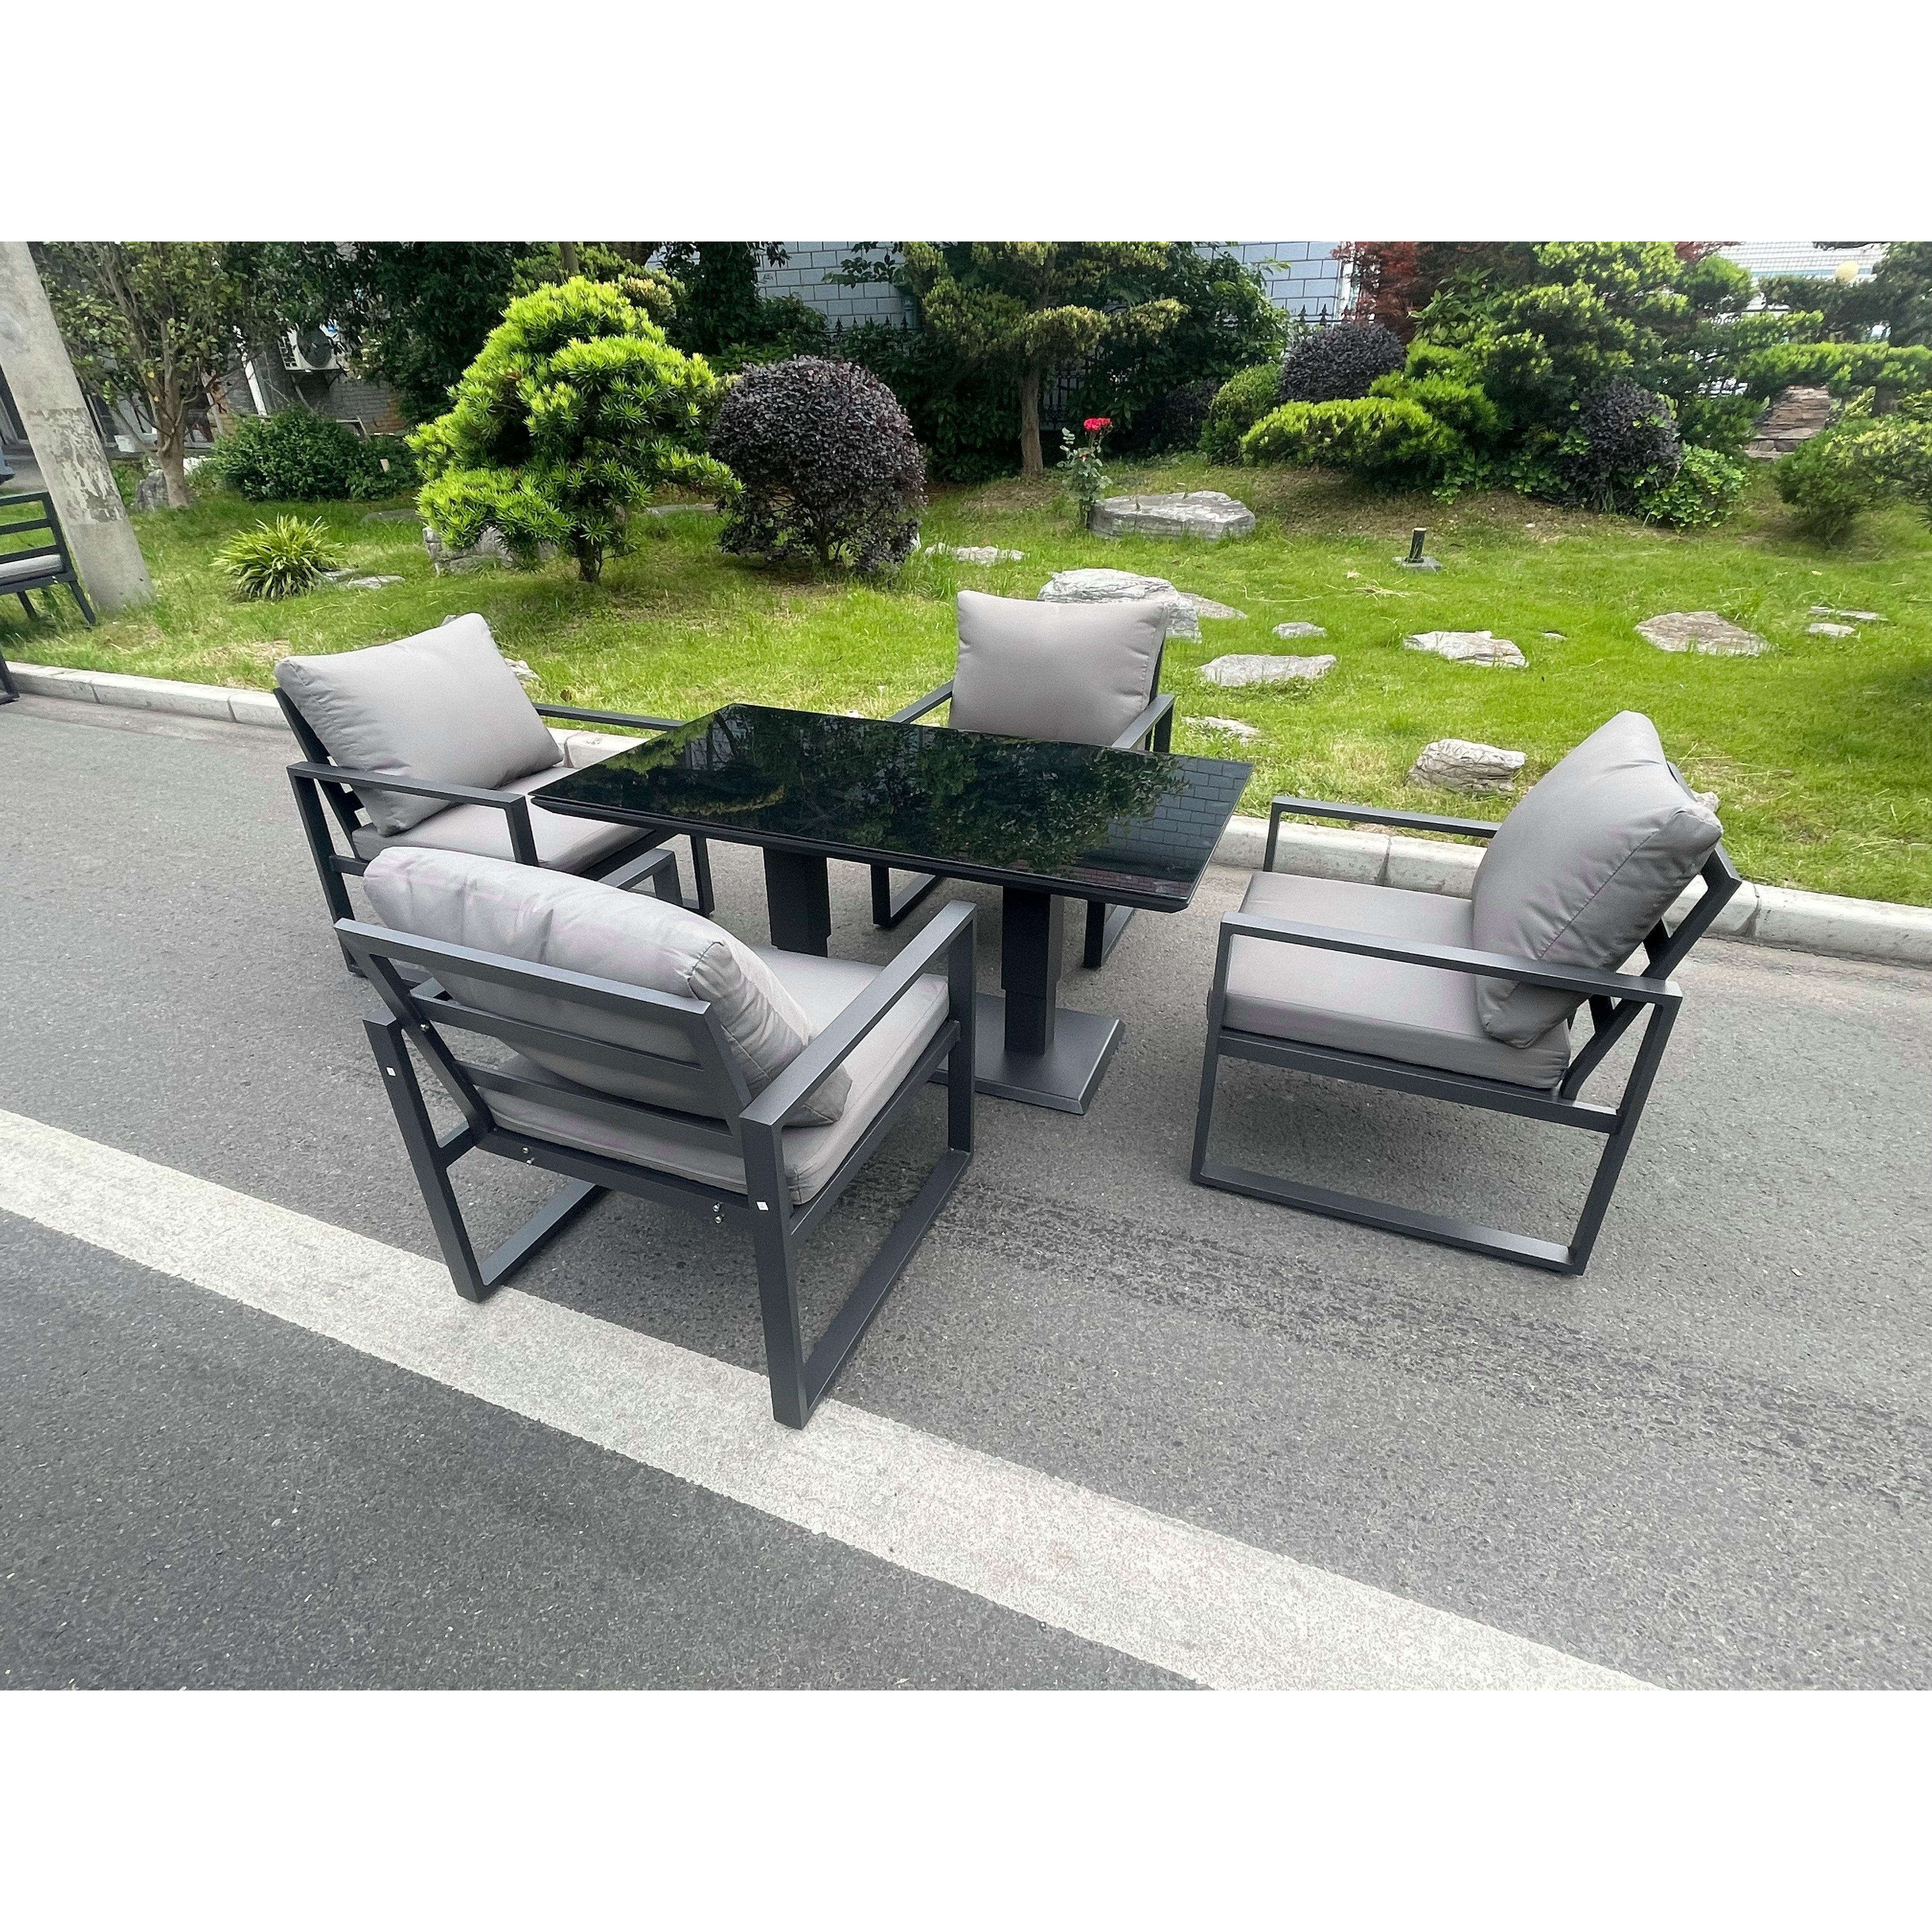 Aluminum Garden Furniture Dining Set Adjustable Rising Lifting Table And Chairs Patio Outdoor 4 Seat Plus Black Tempered Glass Dark Grey - image 1